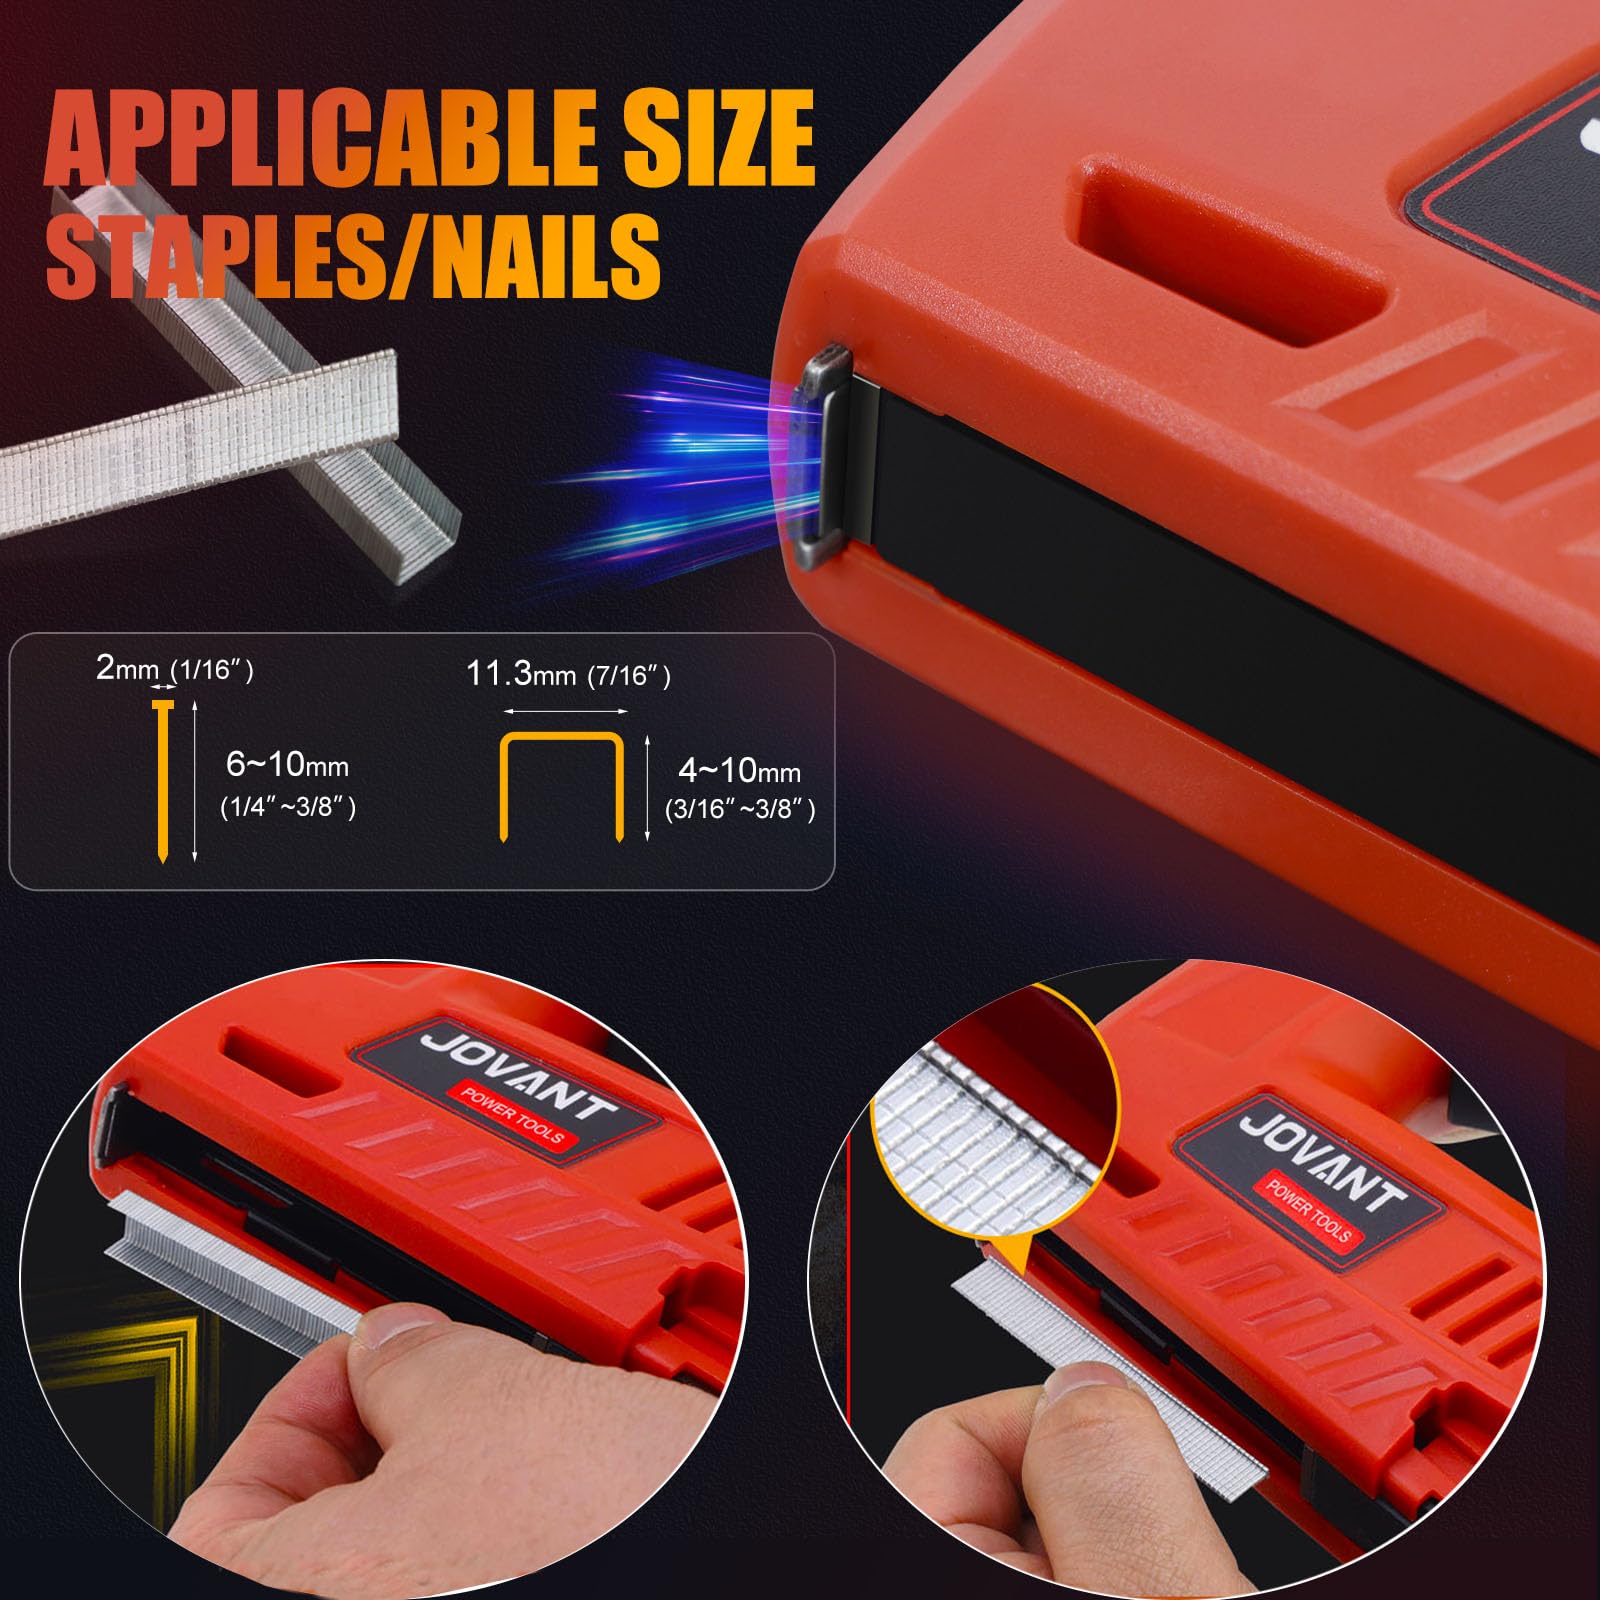 APPLICABLE SIZESTAPLES/NAILS 2mm(1/16") 6~10mm(1/4"~3/8") 11.3mm(7/16") 4~10mm(3/16" ~3/8")